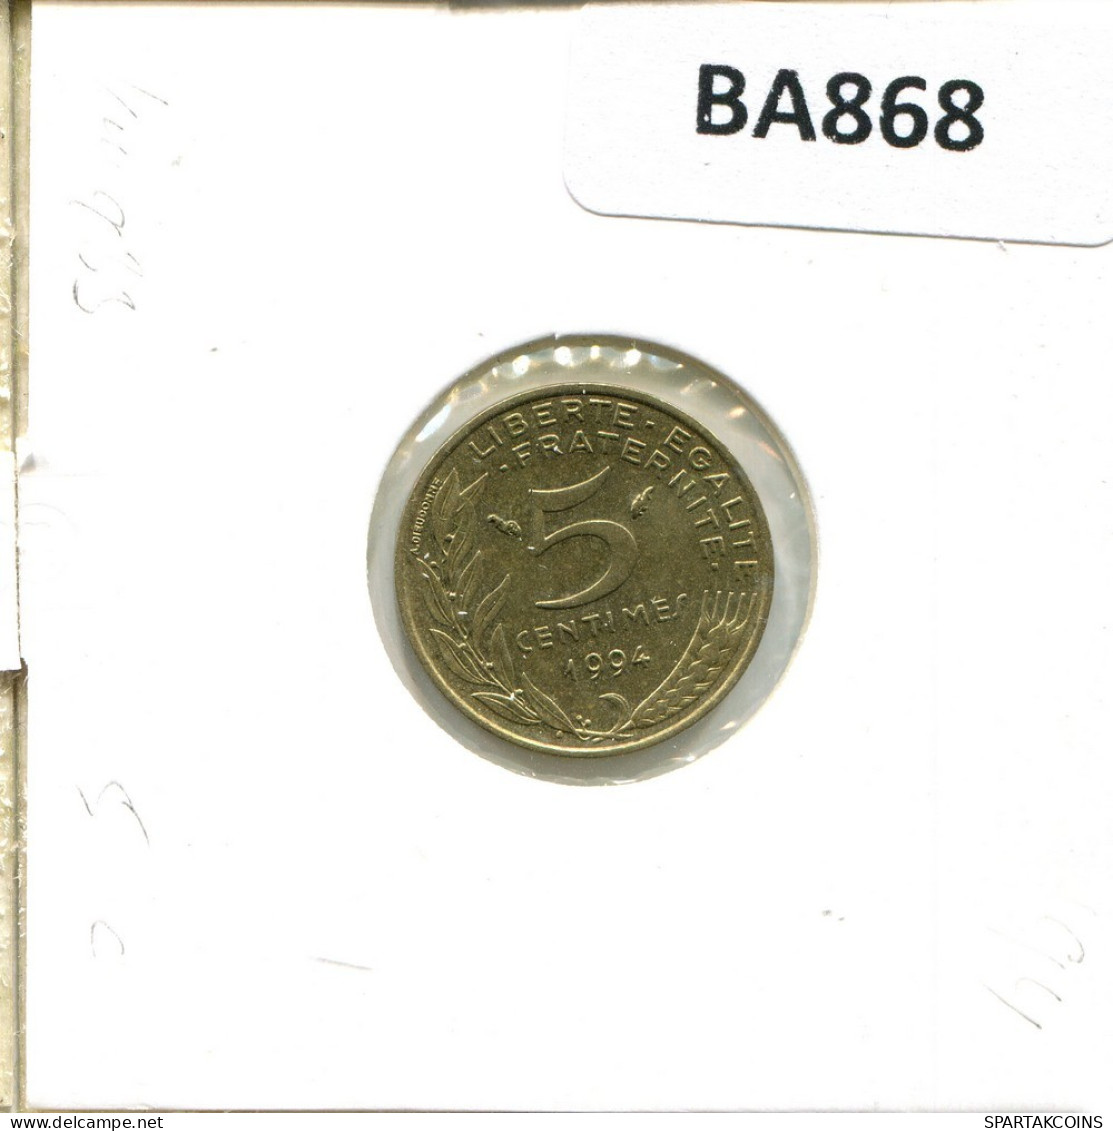 5 CENTIMES 1994 FRANCE Coin French Coin #BA868.U.A - 5 Centimes